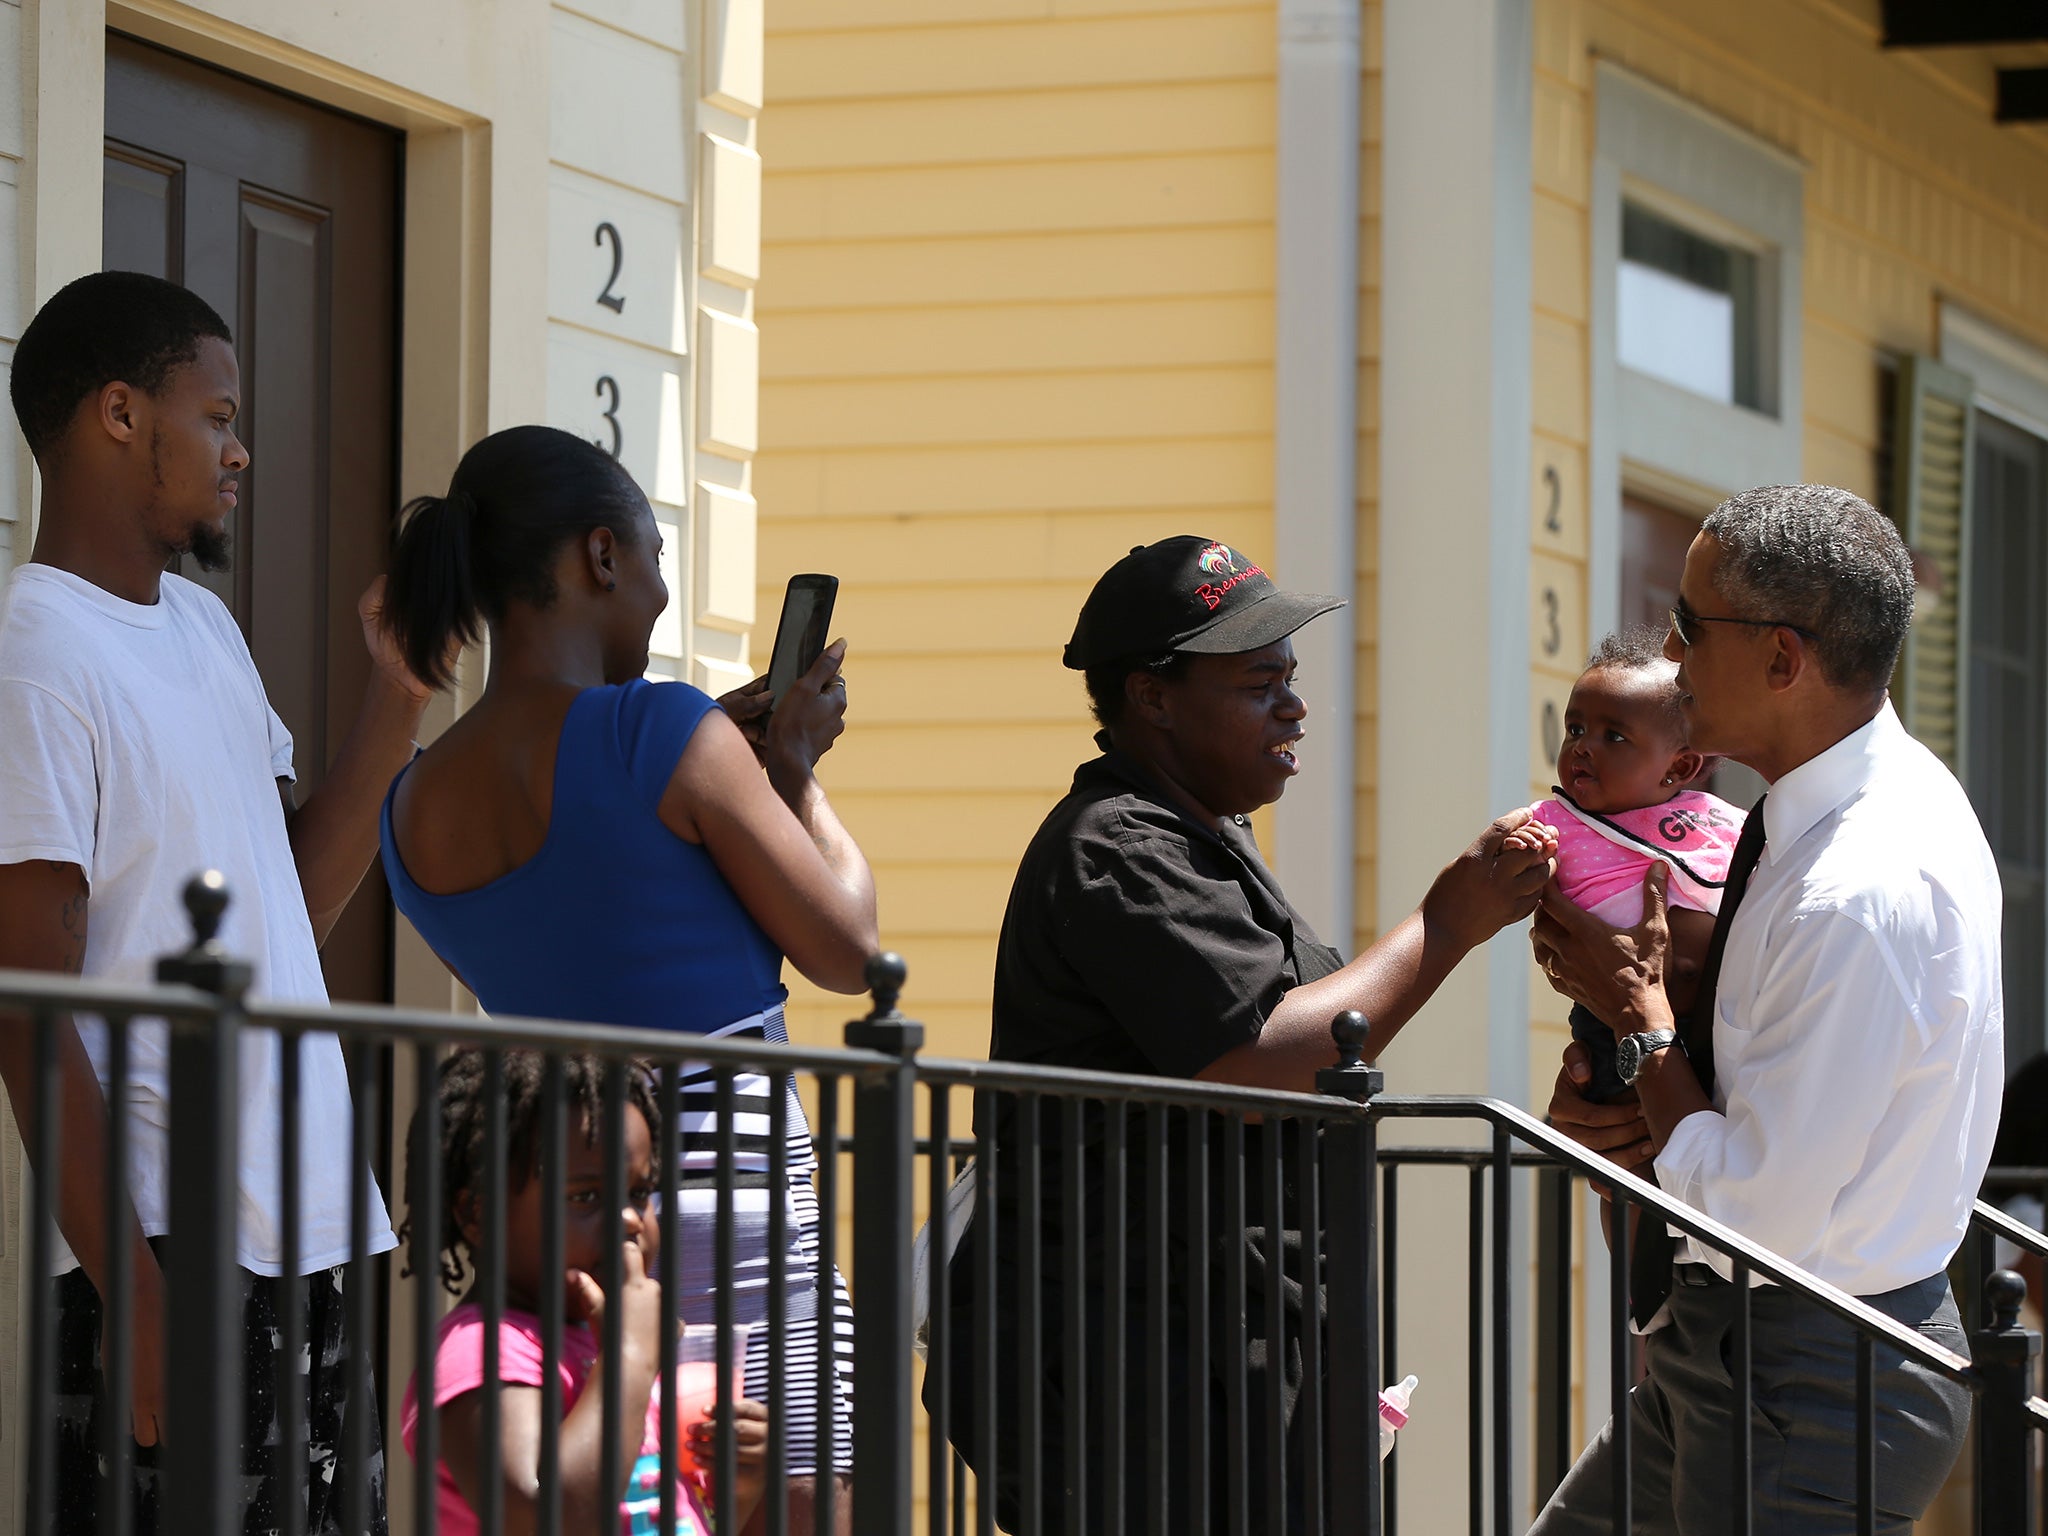 Barack Obama meets residents of the New Orleans district of Tremé, one of America’s oldest black suburbs, as he walks through the city yesterday to see how it has has recovered in the 10 years since Hurricane Katrina.